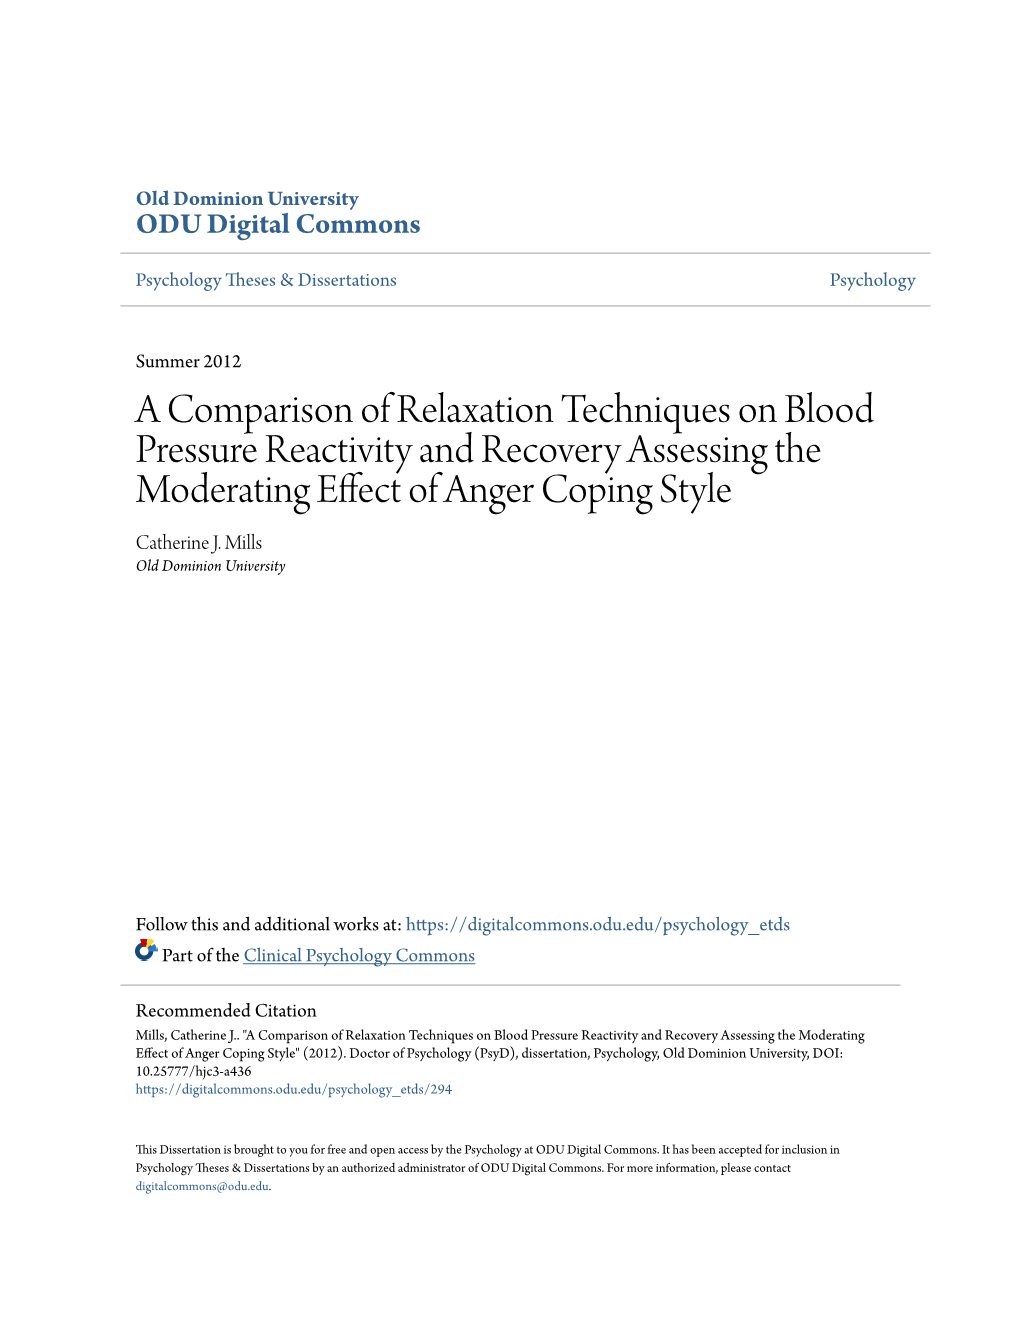 A Comparison of Relaxation Techniques on Blood Pressure Reactivity and Recovery Assessing the Moderating Effect of Anger Coping Style Catherine J